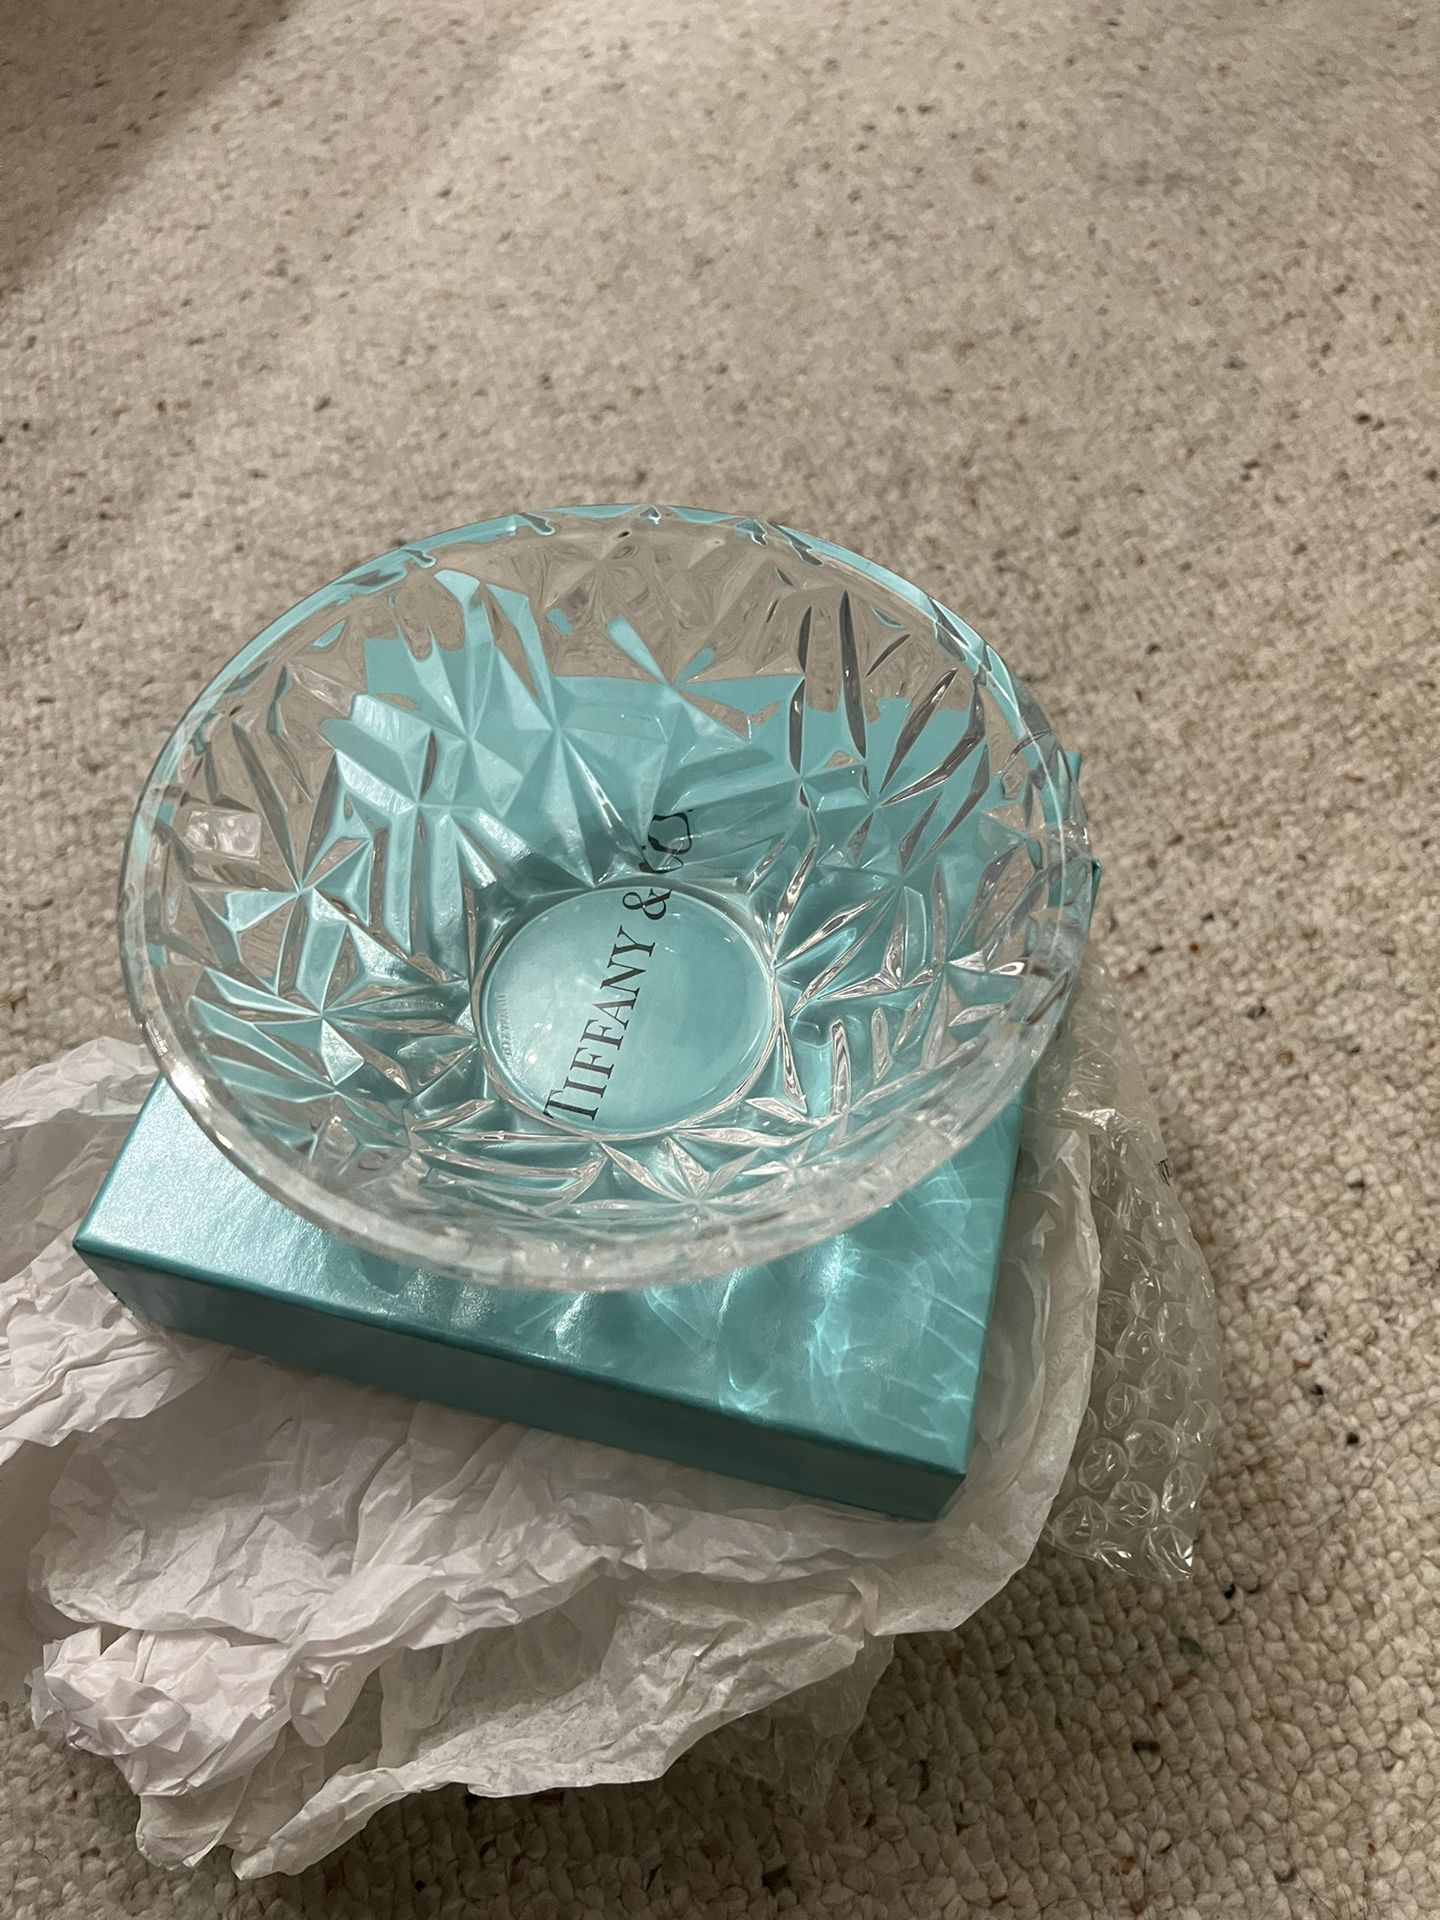 Authentic. Tiffany’s Crystal Bowl